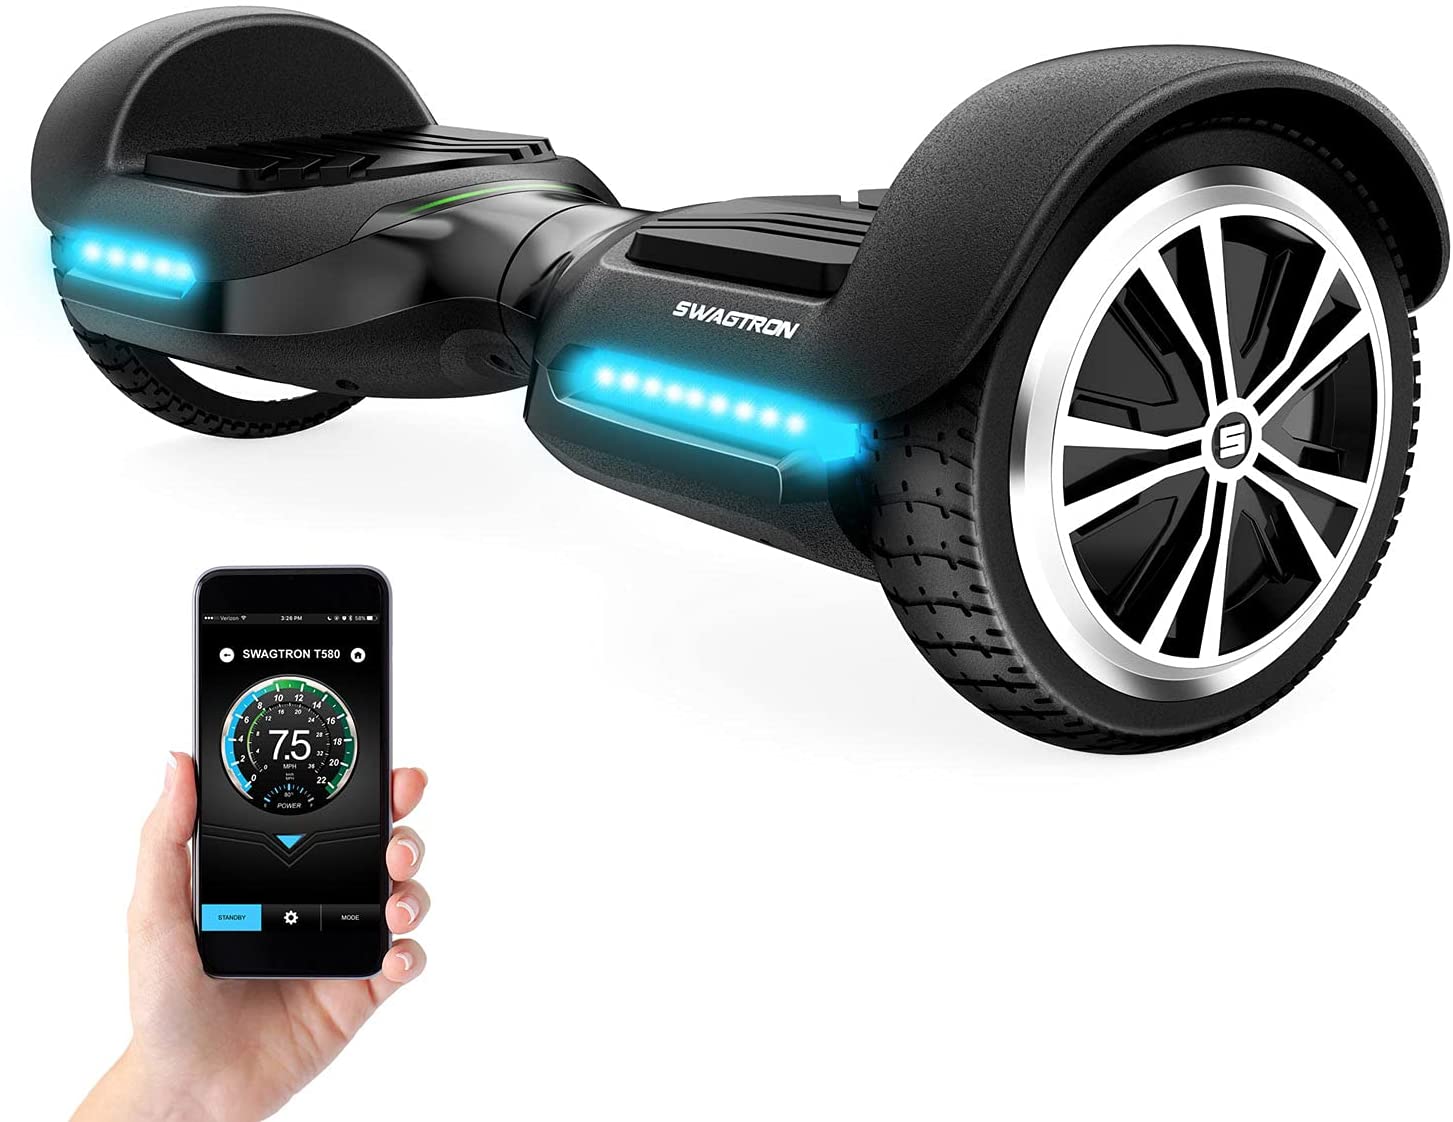 3 Best All Terrain Hoverboard for Grass, Gravel and Dirt